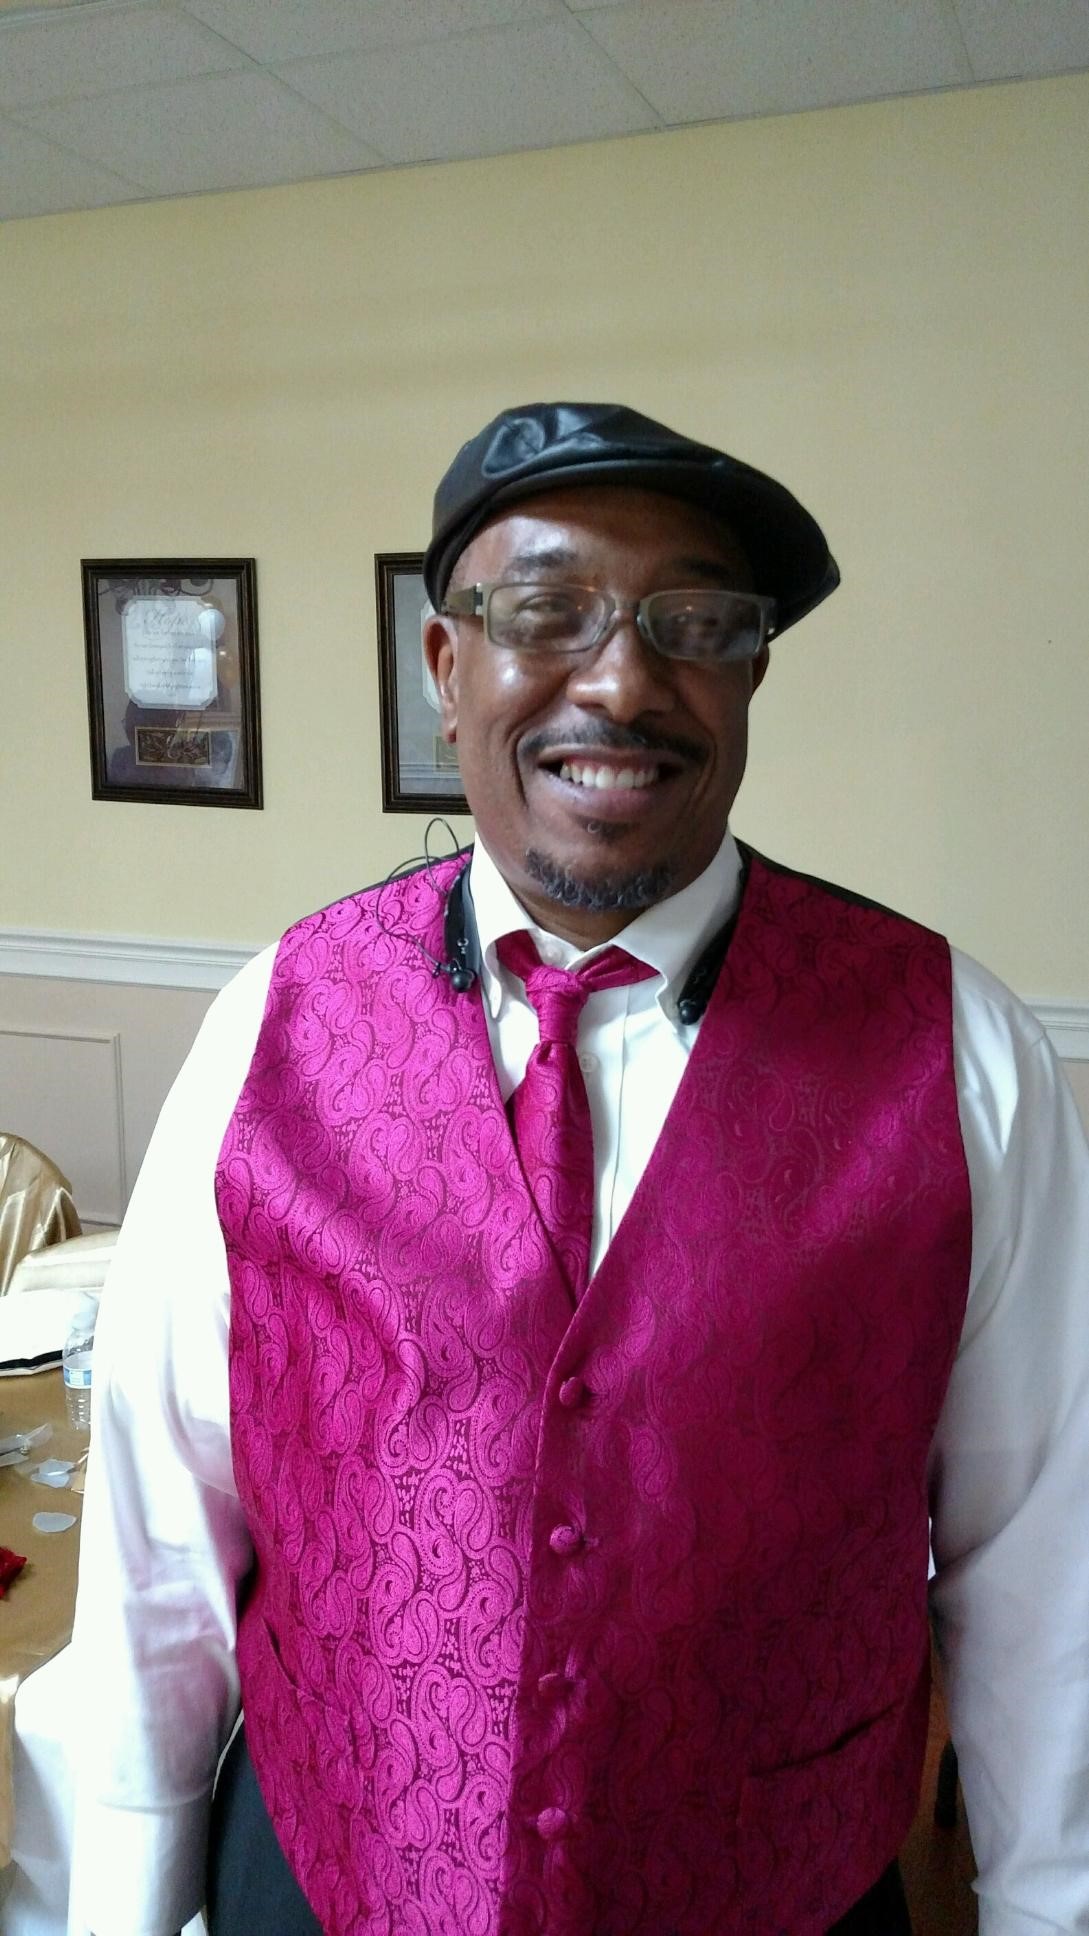 Black Man smiling big with a magenta vest, long sleeved white shirt and a hat